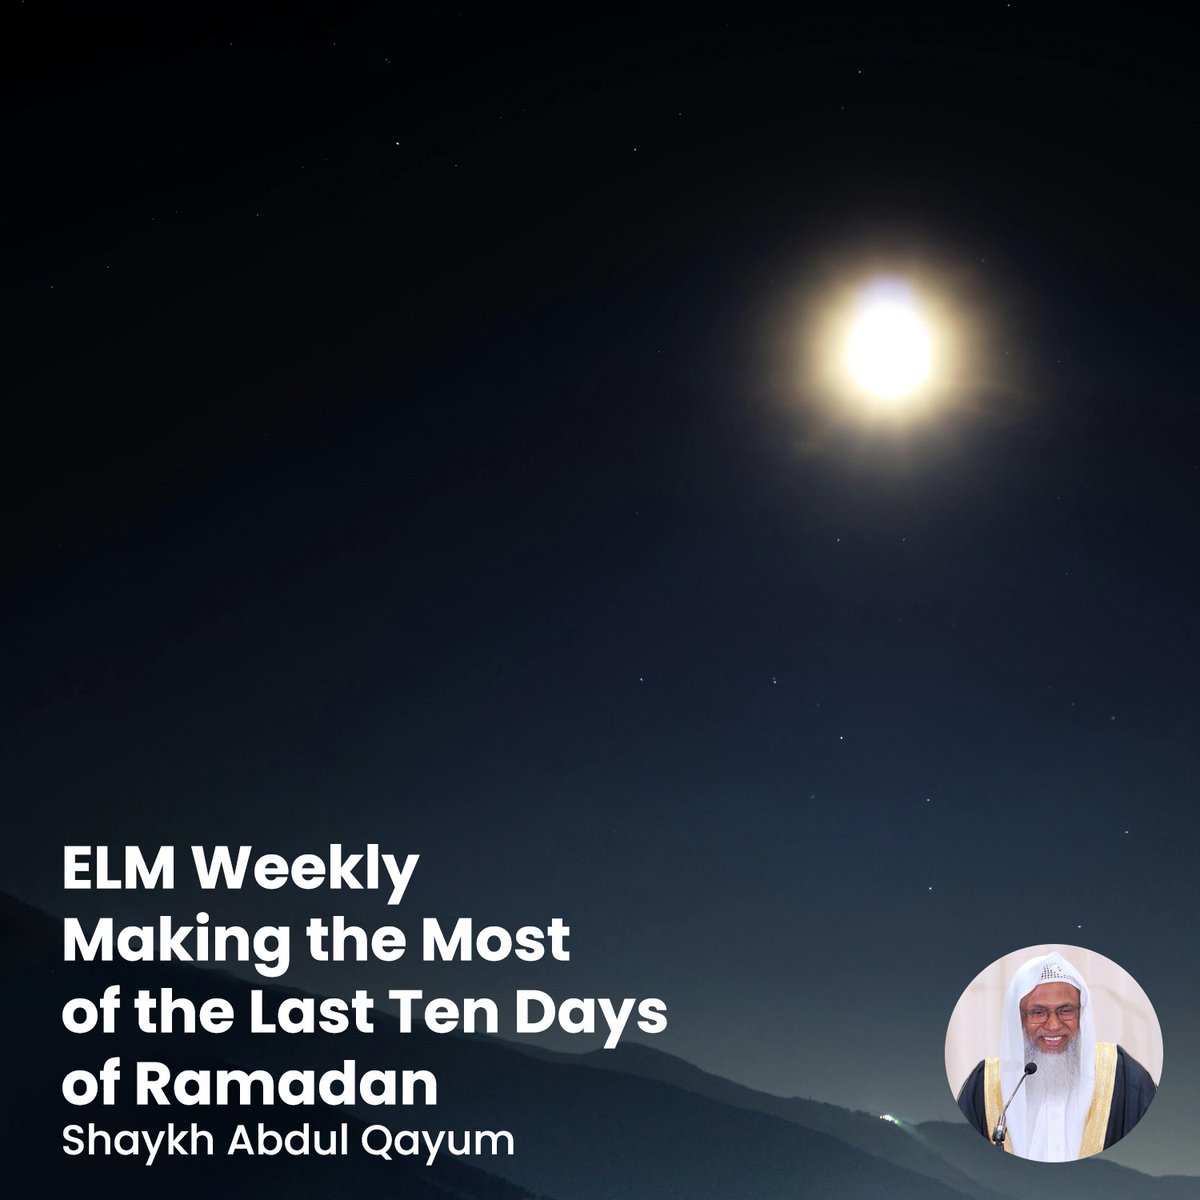 🌙✨ As we enter the Last Ten Days, the urgency to deepen our devotion and seek forgiveness intensifies Read the blog to find essential insights on maximising these few sacred nights: eastlondonmosque.org.uk/blog/making-th… #EastLondonMosque #FinalTenDays #LaylatulQadr #RamadanReflections